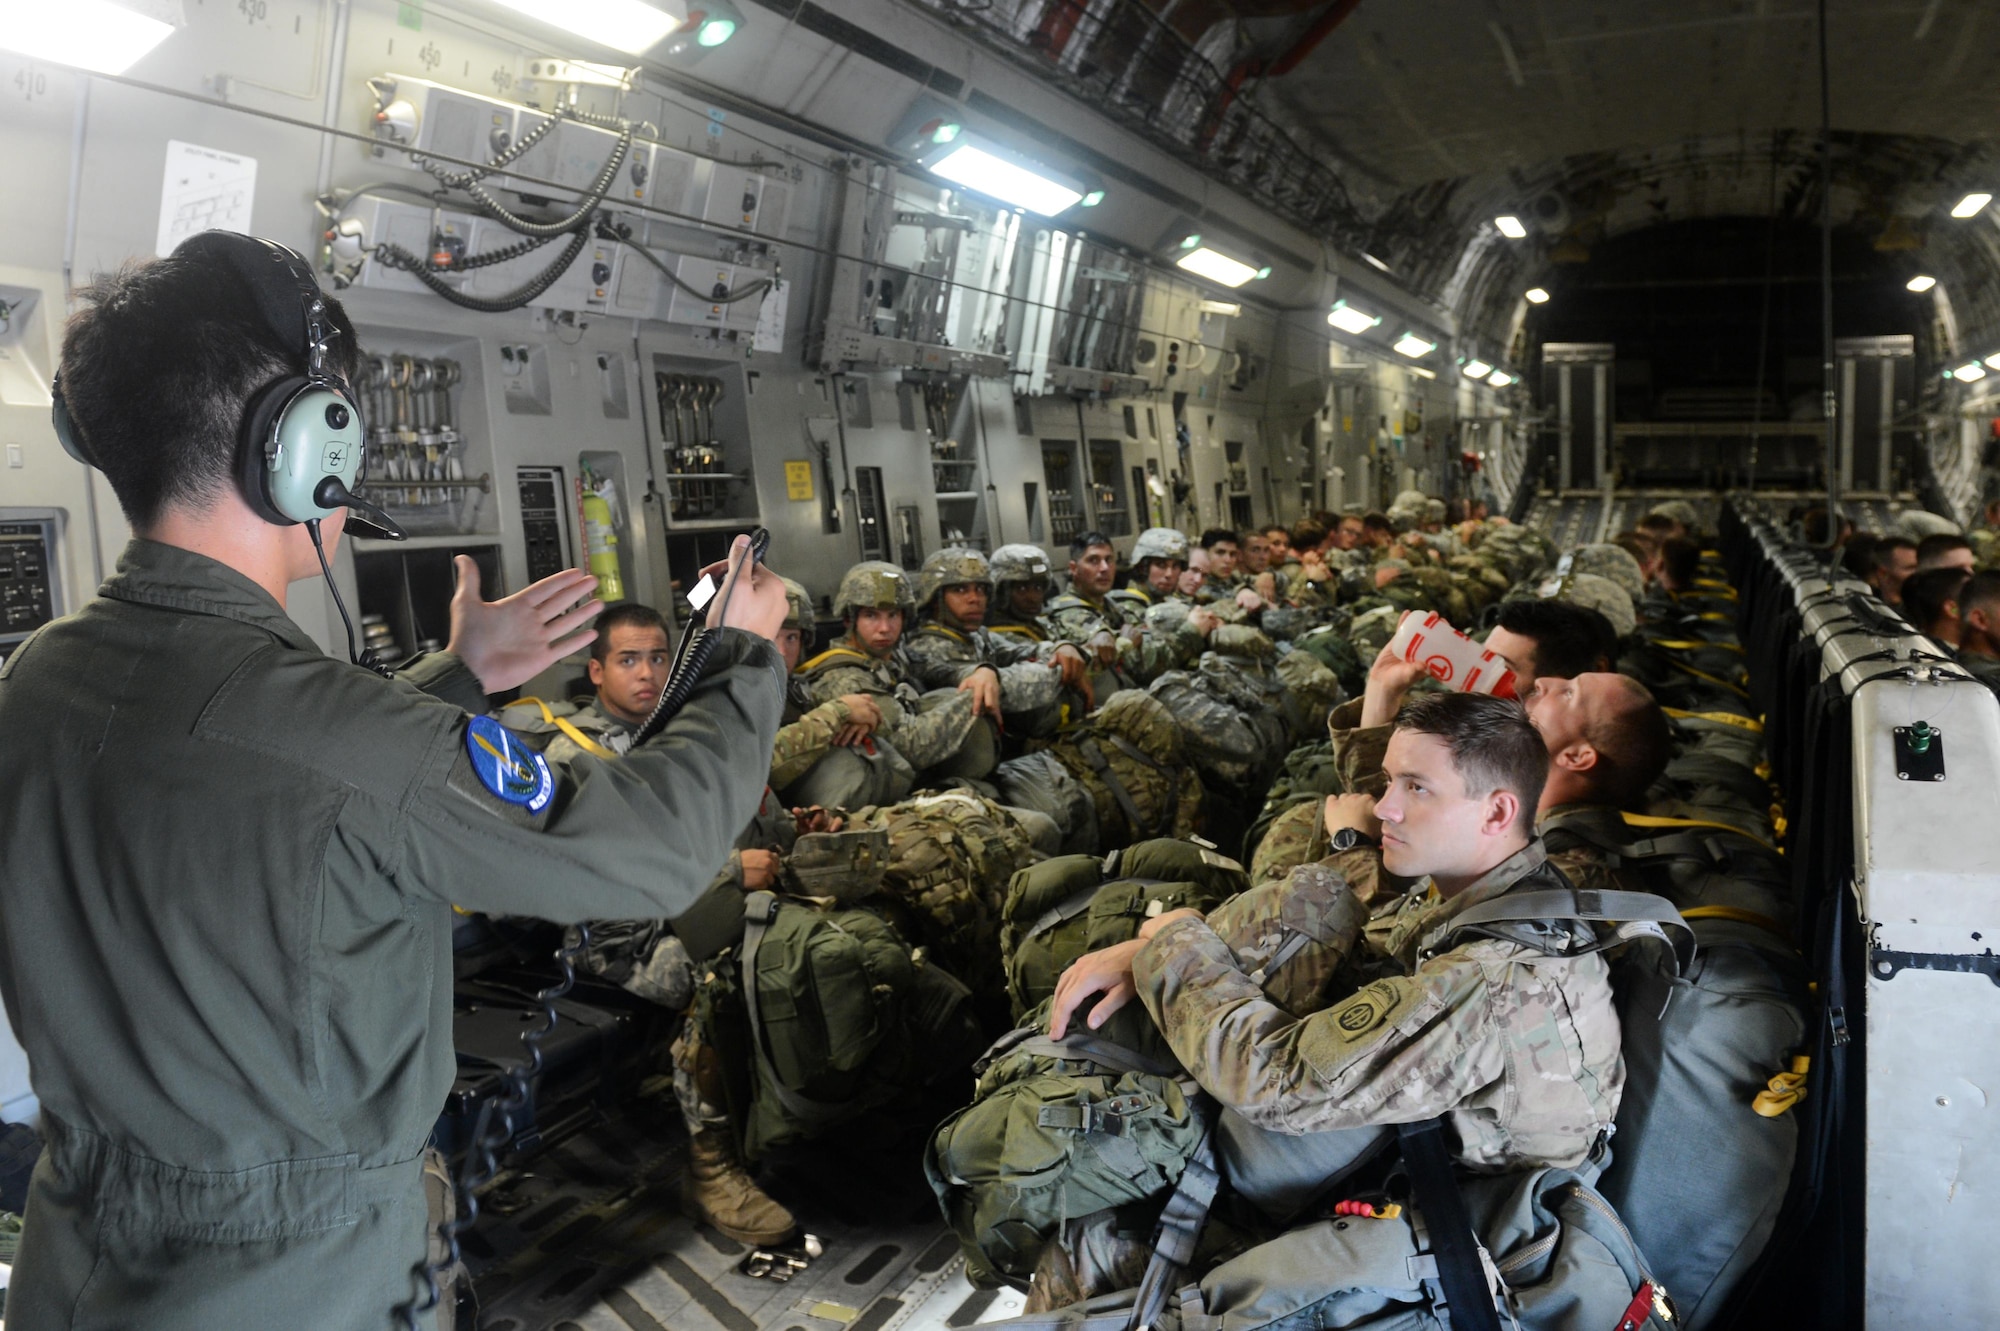 U.S. Air Force Staff Sgt. Donovan Eliopulos, 7th Airlift Squadron, briefs U.S. Army members from the 82nd Airborne Divison egress procedures on a C-17 Globemaster III aircraft from Joint Base Lewis-McChord, W.A., during Battalion Mass-Tactical week at Pope Army Airfield, N.C., July 12, 2016. During mass-tactical week the Army and Air Force units work together to improve interoperability for worldwide crisis, contingency and humanitarian operations. (U.S. Air Force photo by Staff Sgt. Sandra Welch)